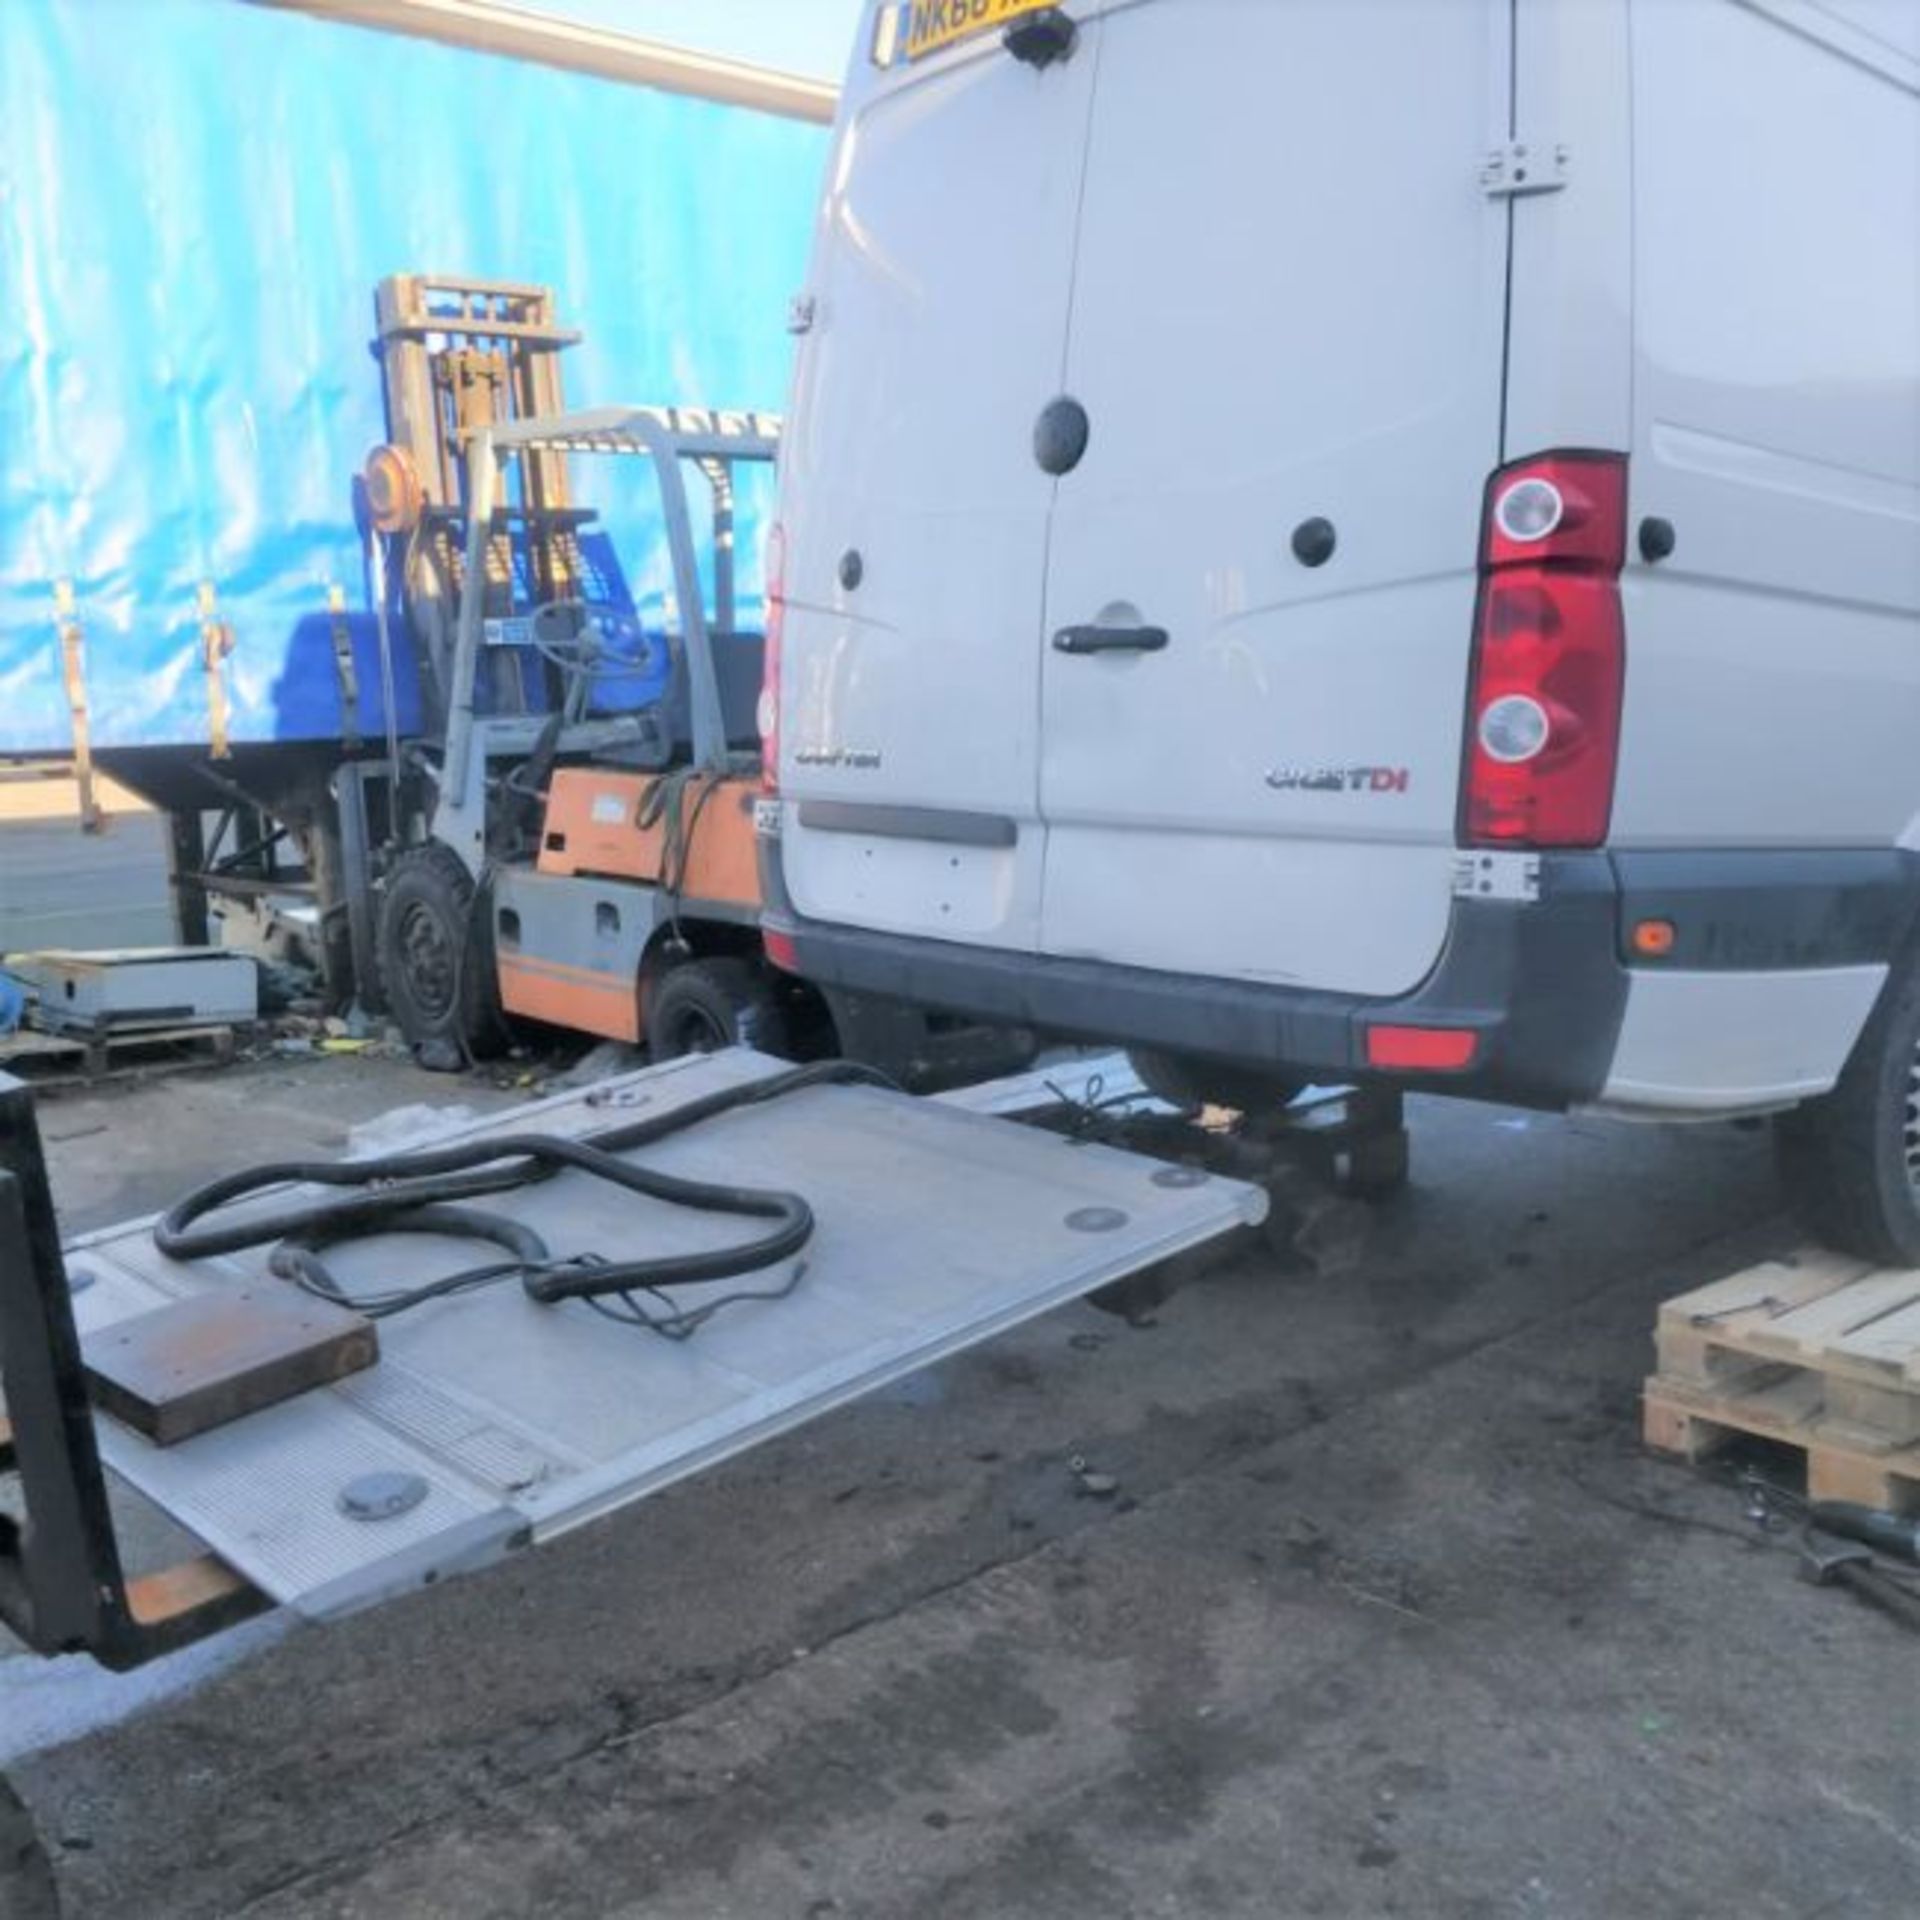 1 x Tail Lift For Commercial Vans - Heavy Duty - Size 140 x 155 cms - CL664 - Location: Altrincham